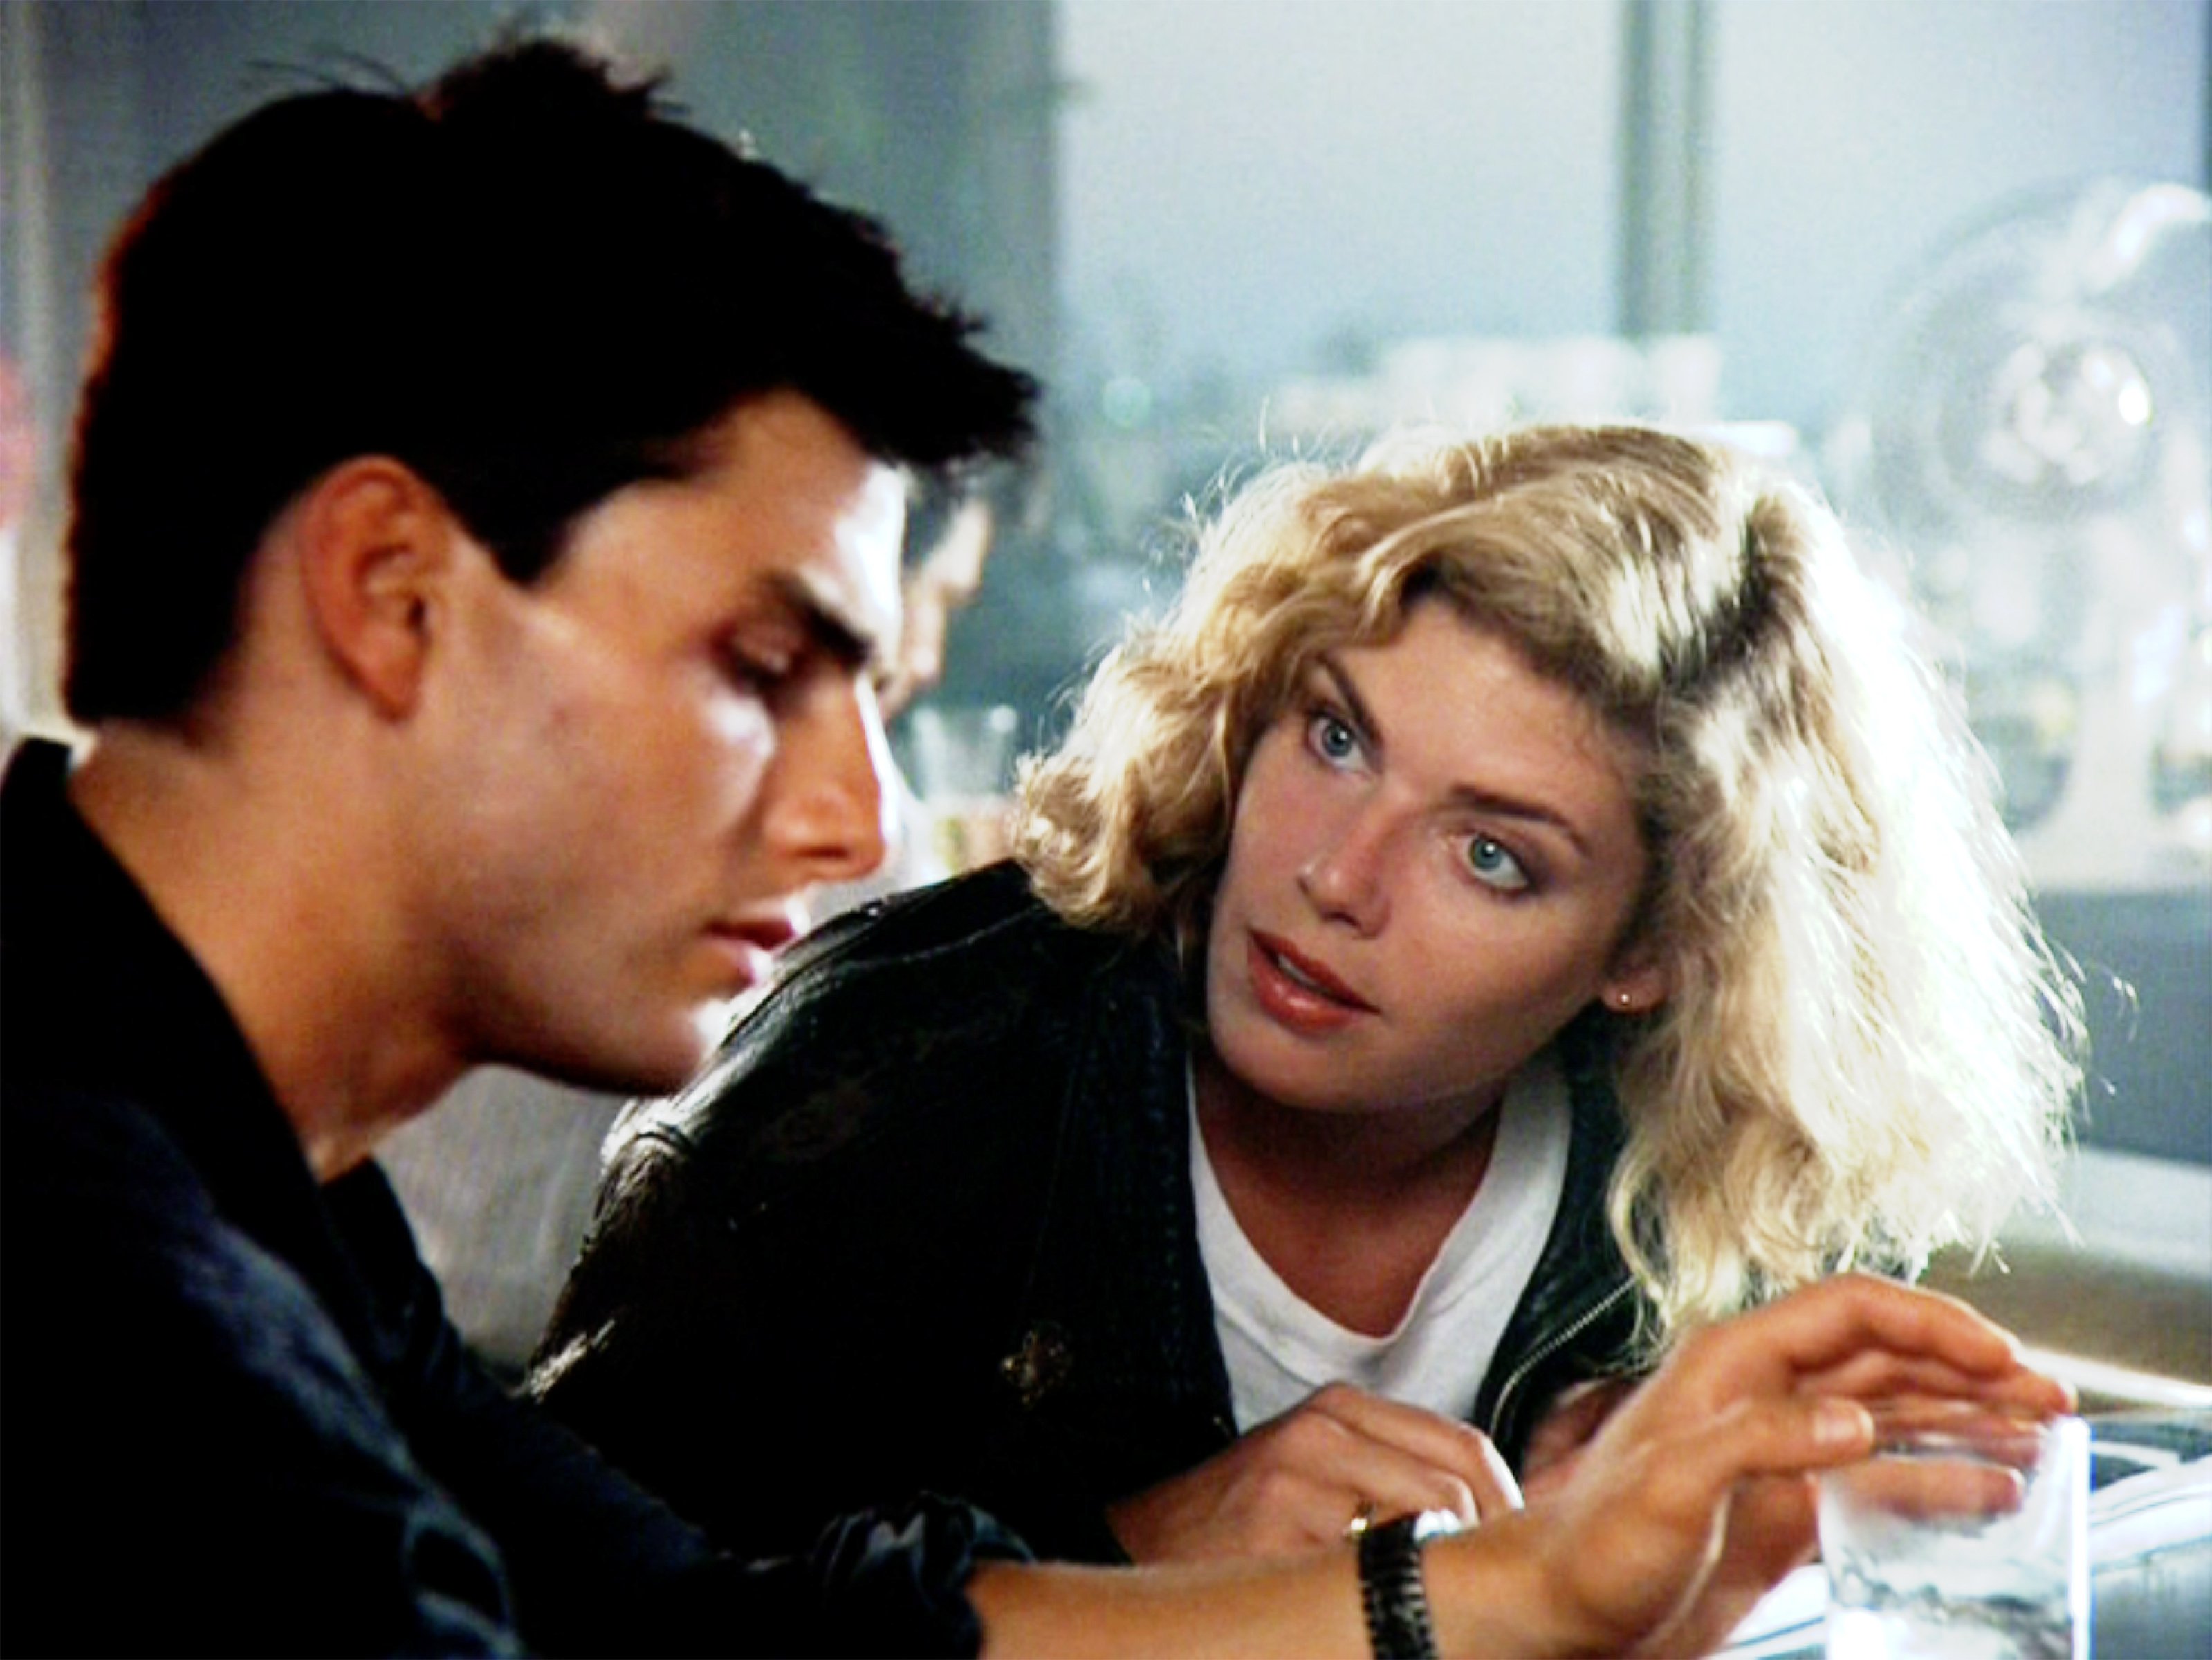 Tom Cruise and Kelly McGillis appear in the cast of 'Top Gun'